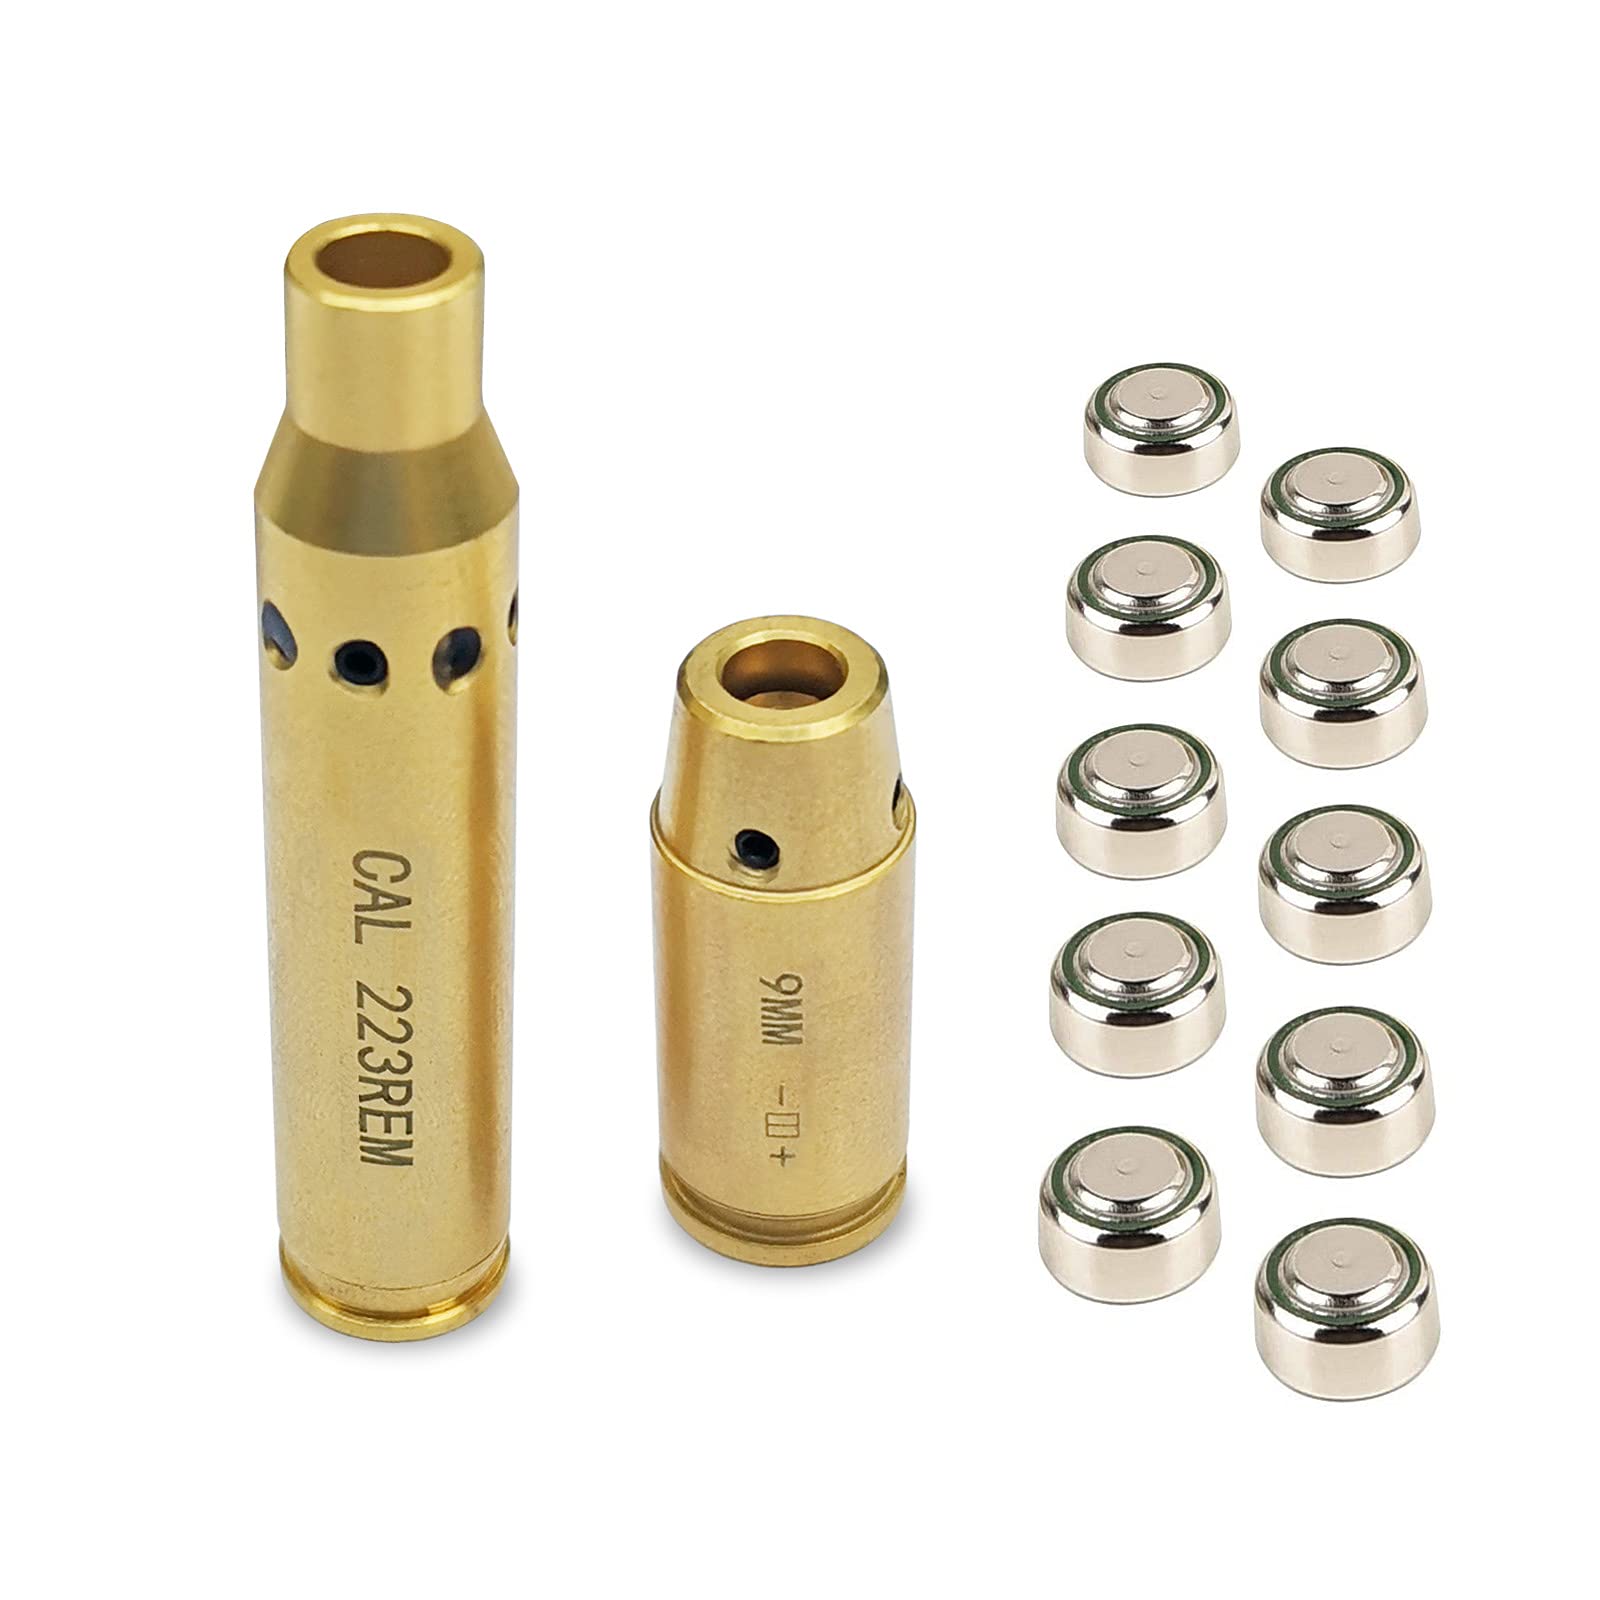 ARKSight Laser Boresighter for 223 and 9MM Cal, Red Laser Brass Chamber Bore Sight Kit for Rifle Scopes and Handgun